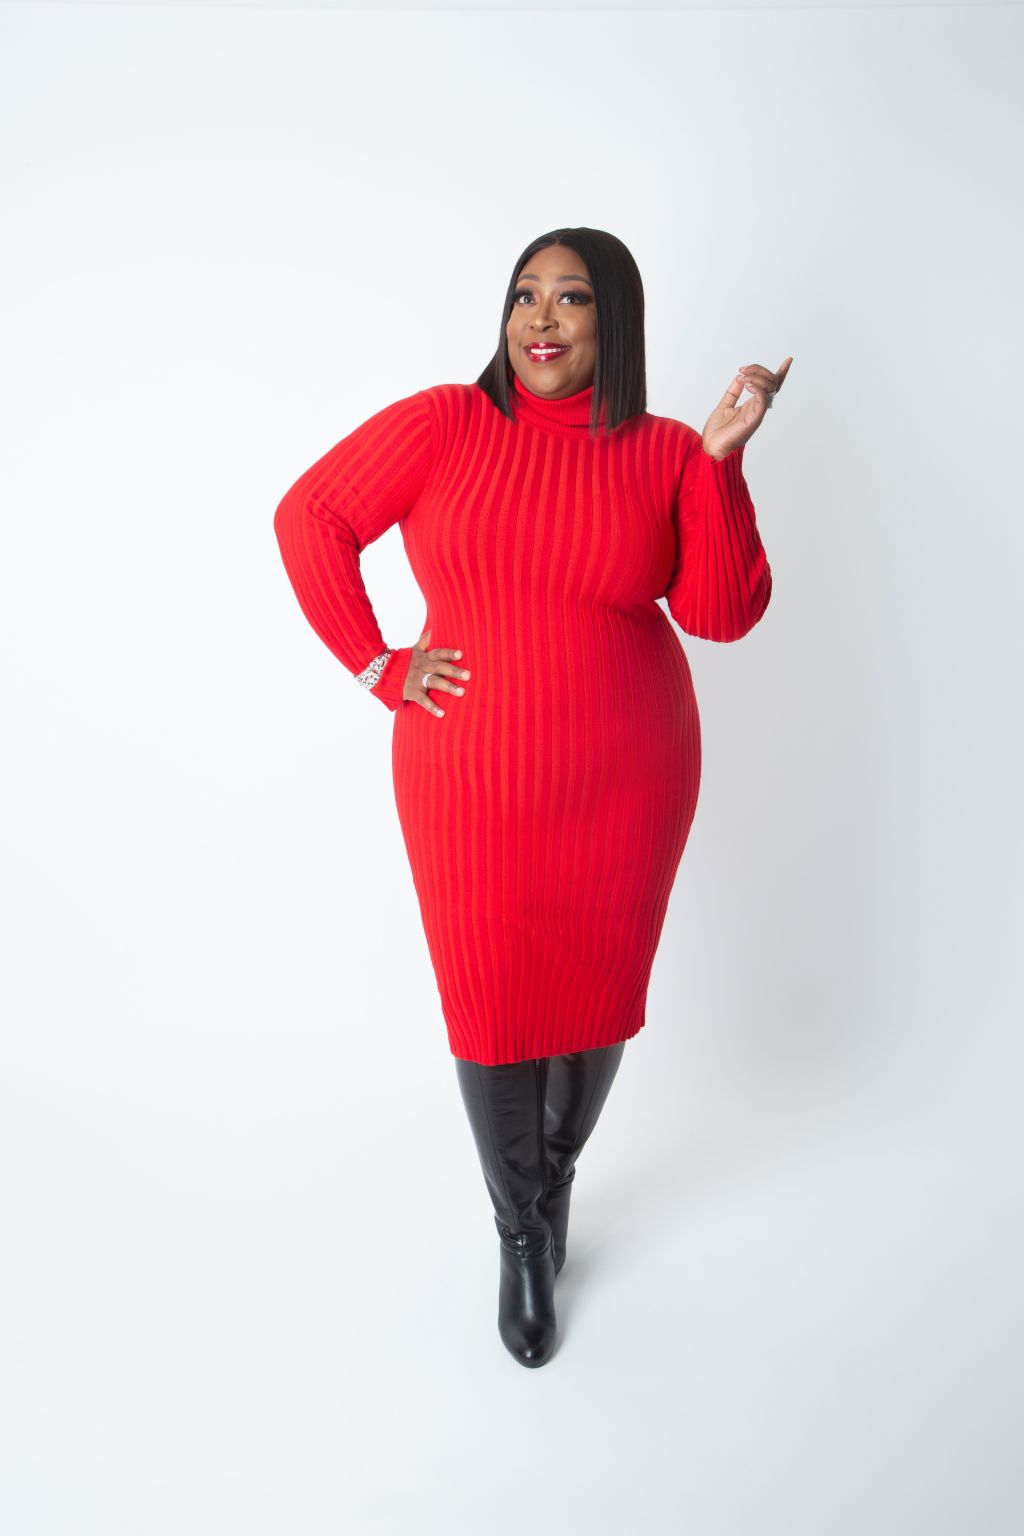 Ashley Stewart x Loni Love Holiday Collection